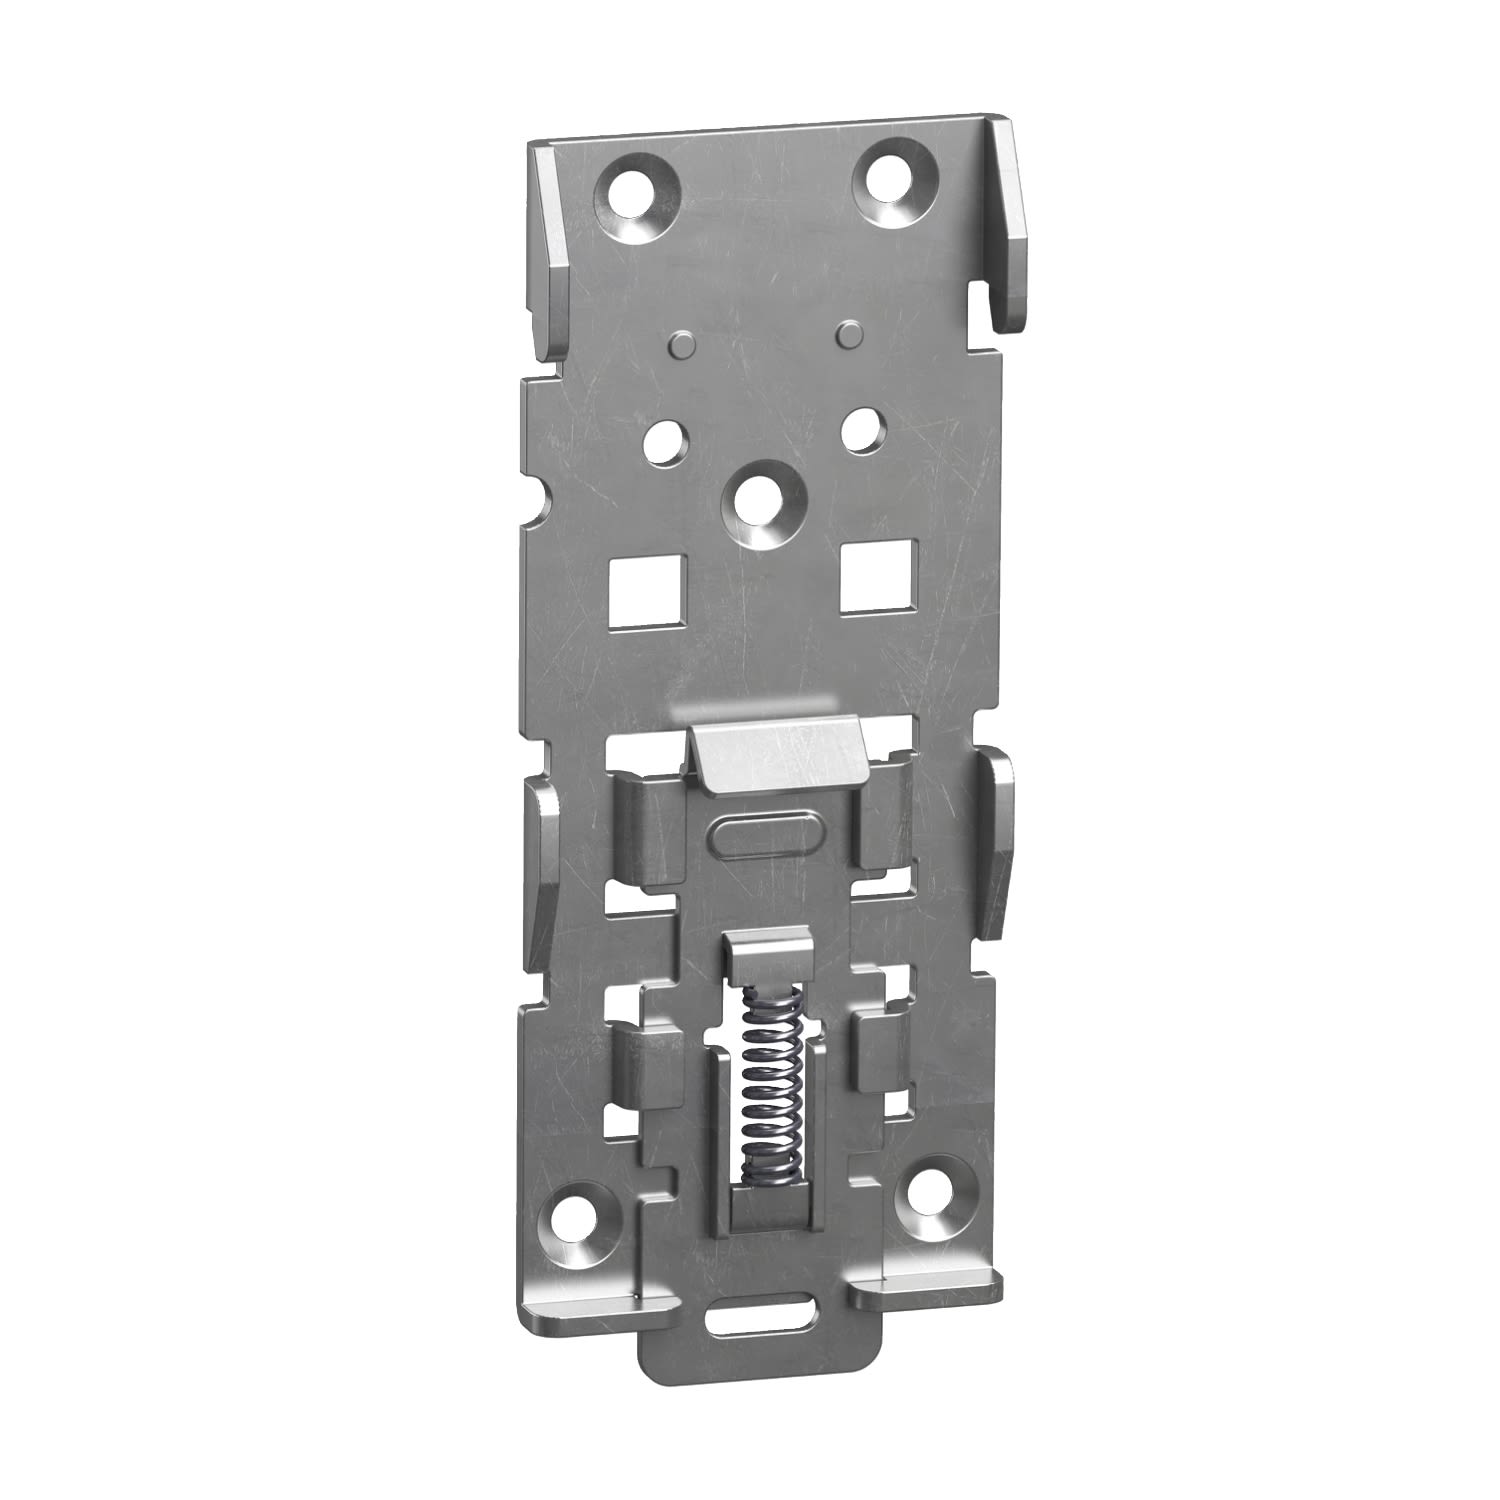 Schneider Electric ABLPA Series DIN Rail Mounting Kit, for use with Power Supply